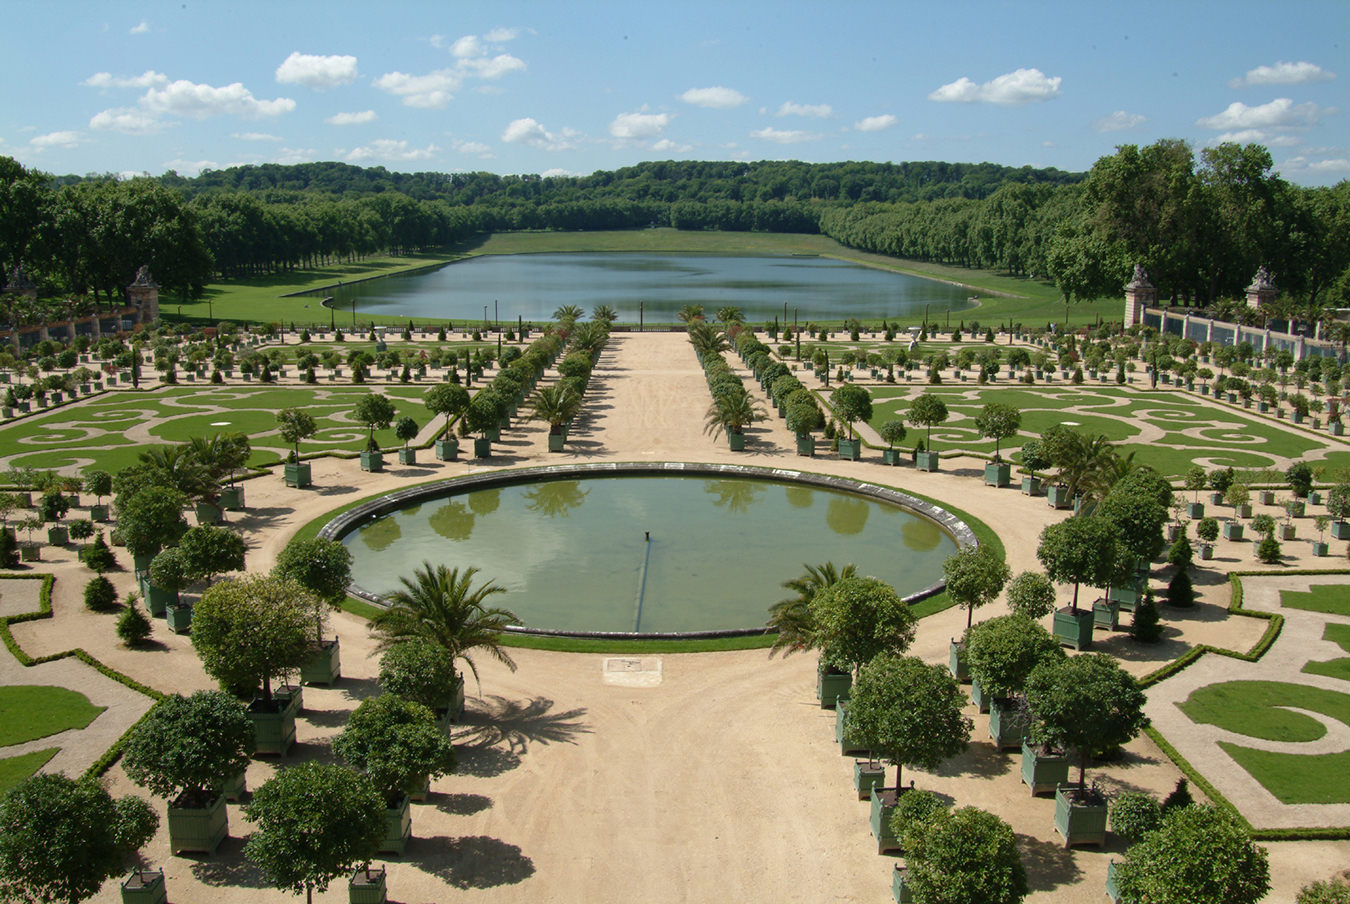 The Gardens  Palace of Versailles